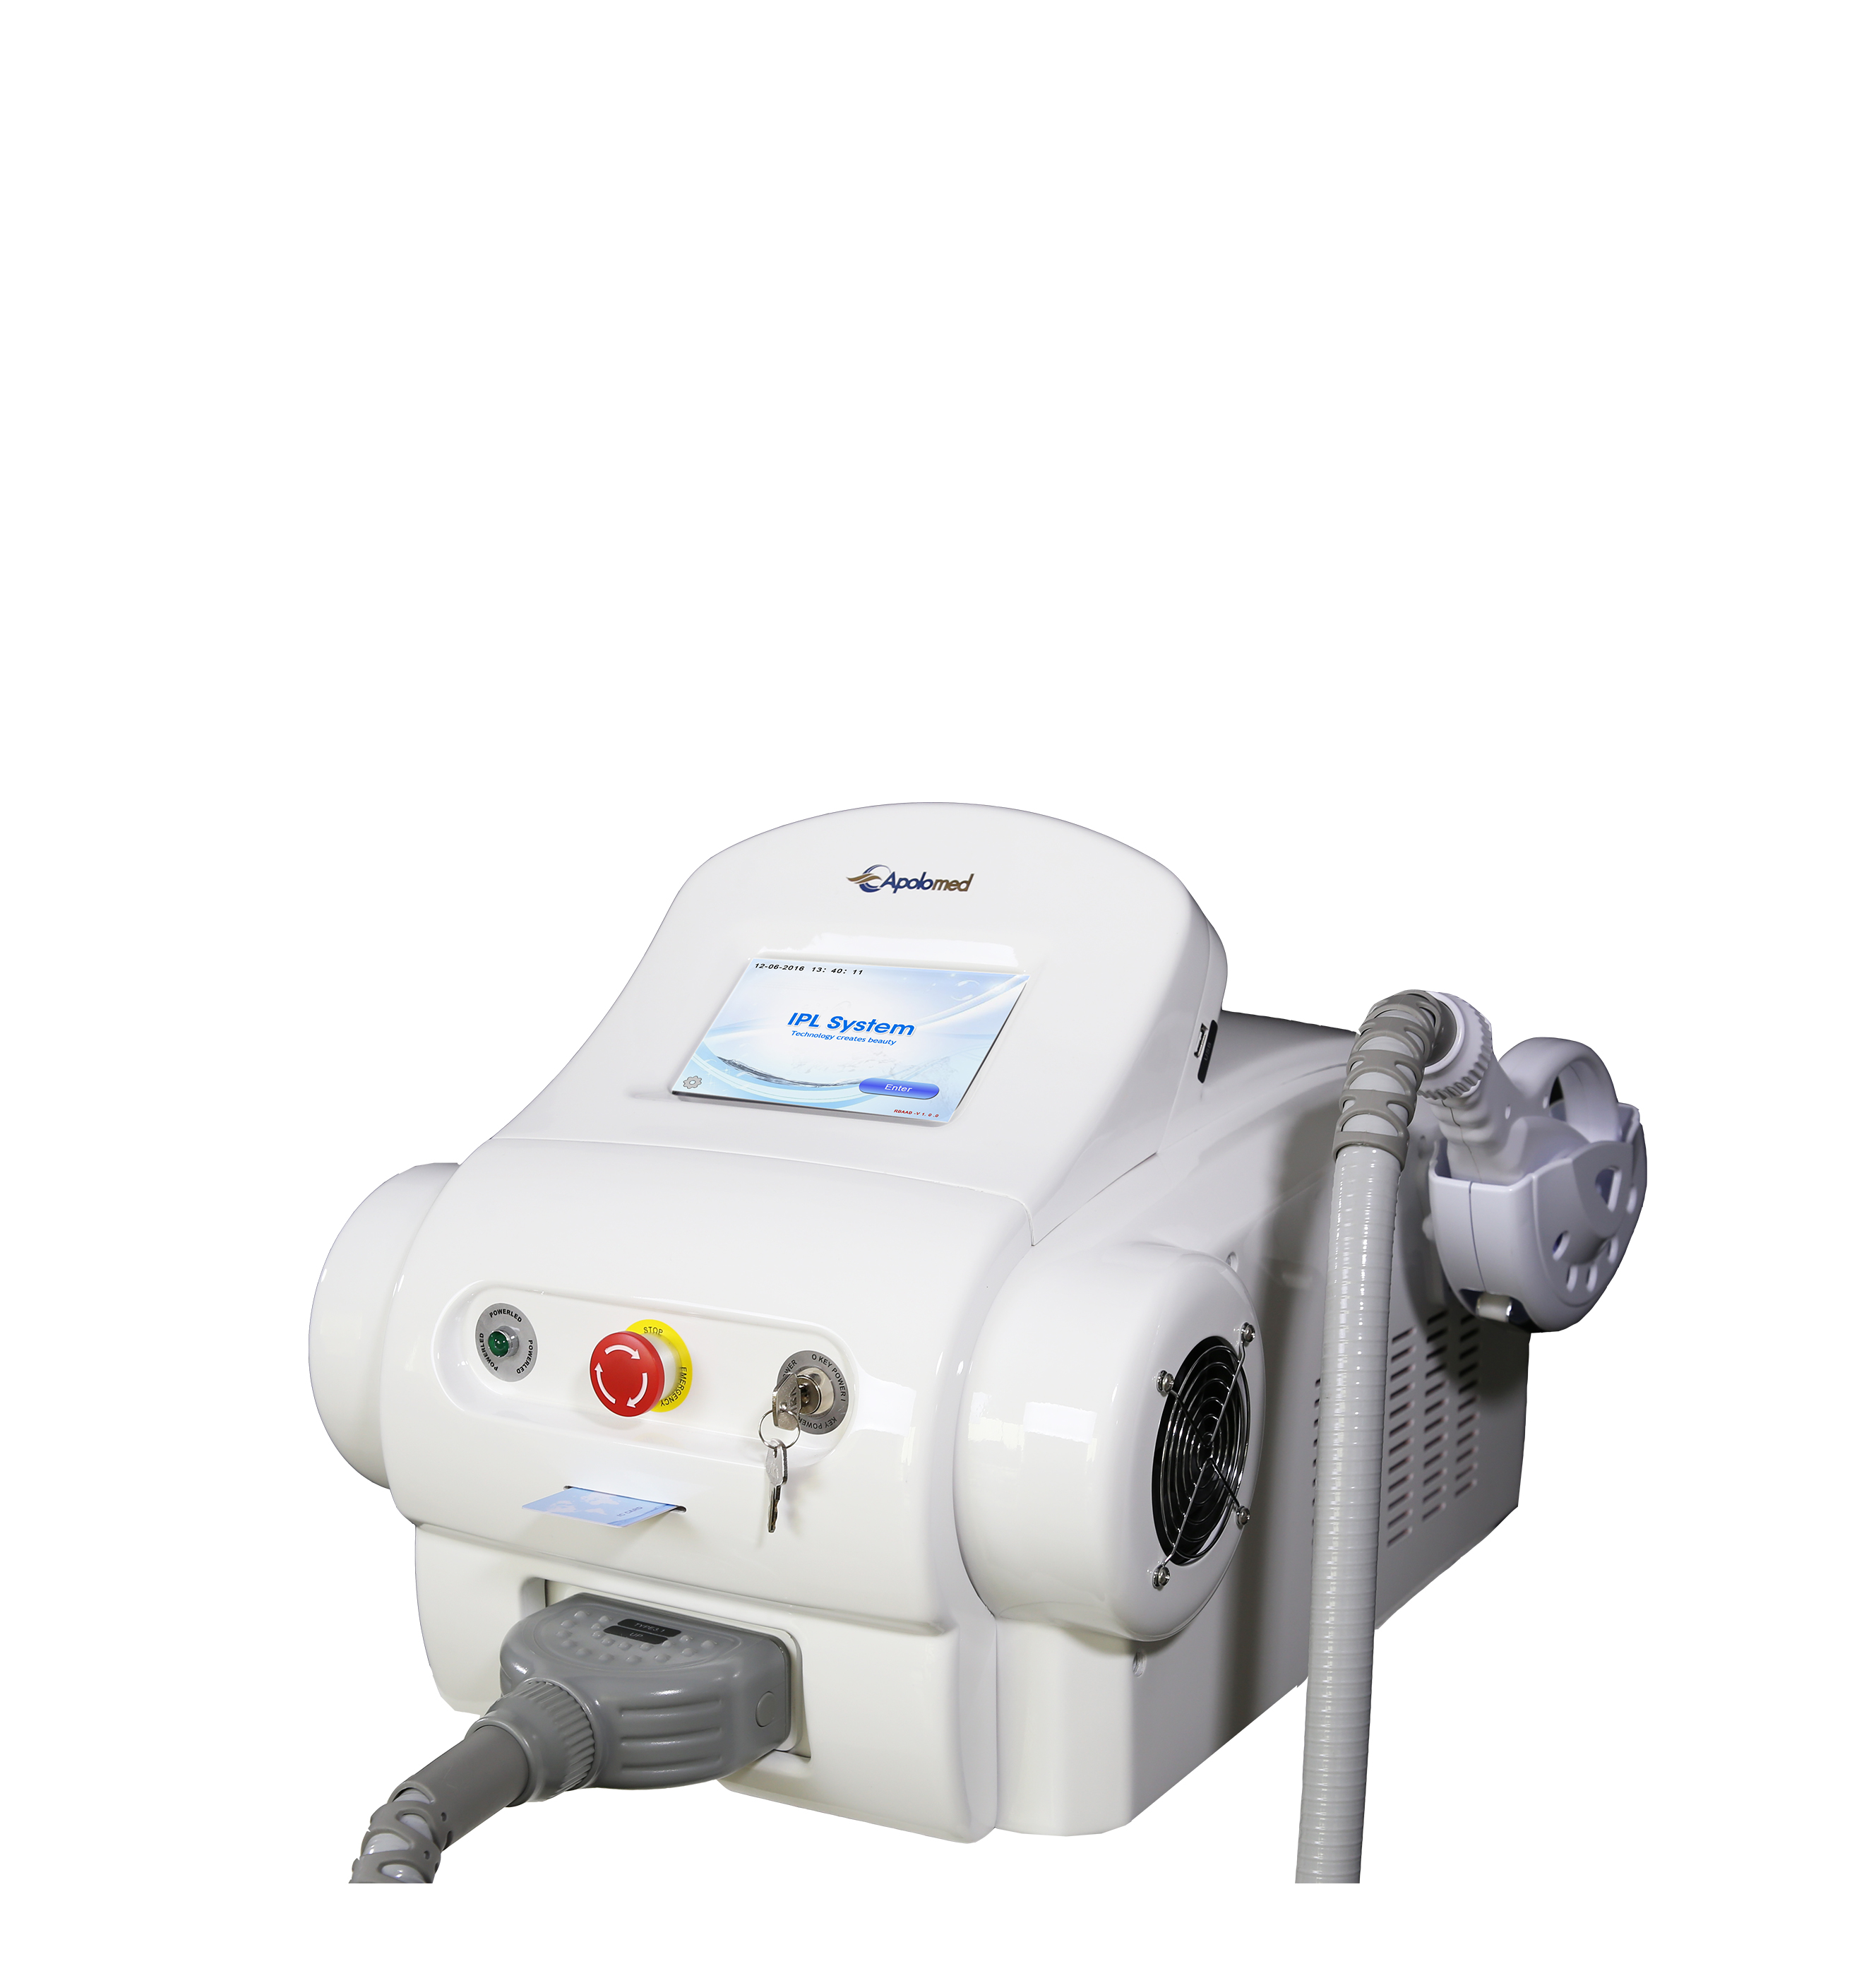 Personlized Products Nd Laser -
 IPL SHR HS-300A – Apolo